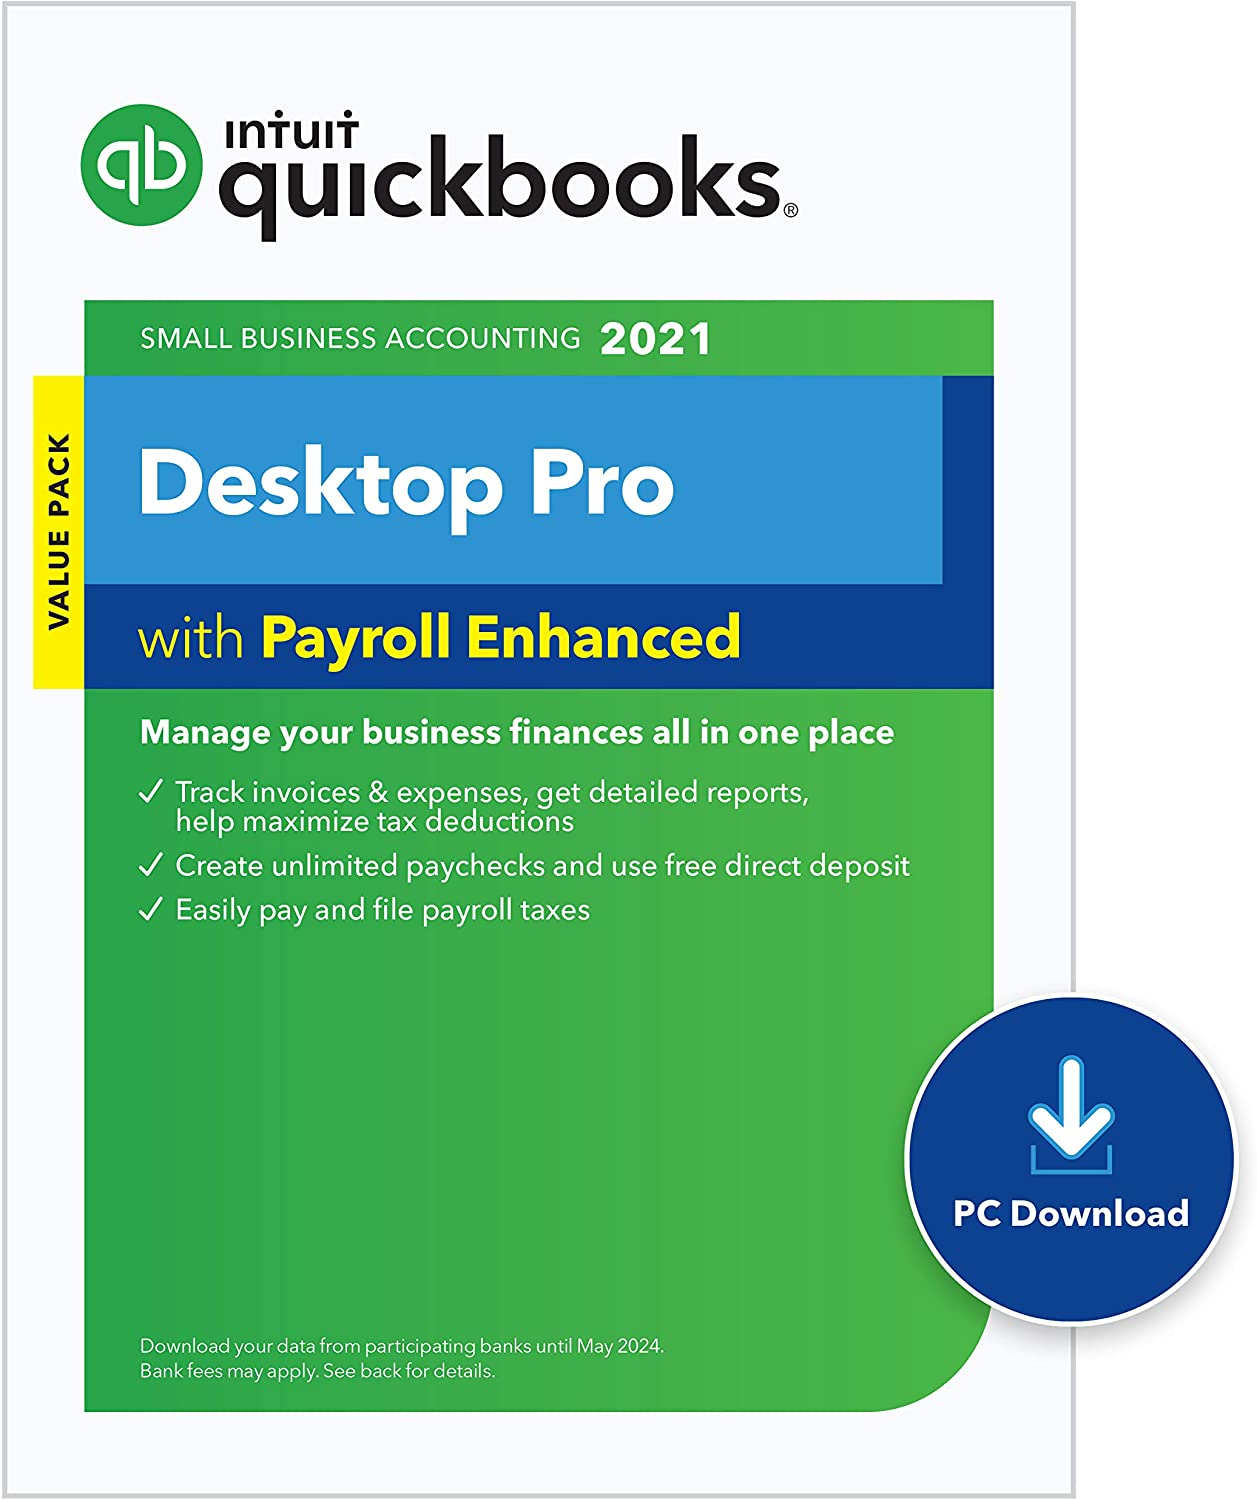 may i open my quickbooks file for mac in the pc windows